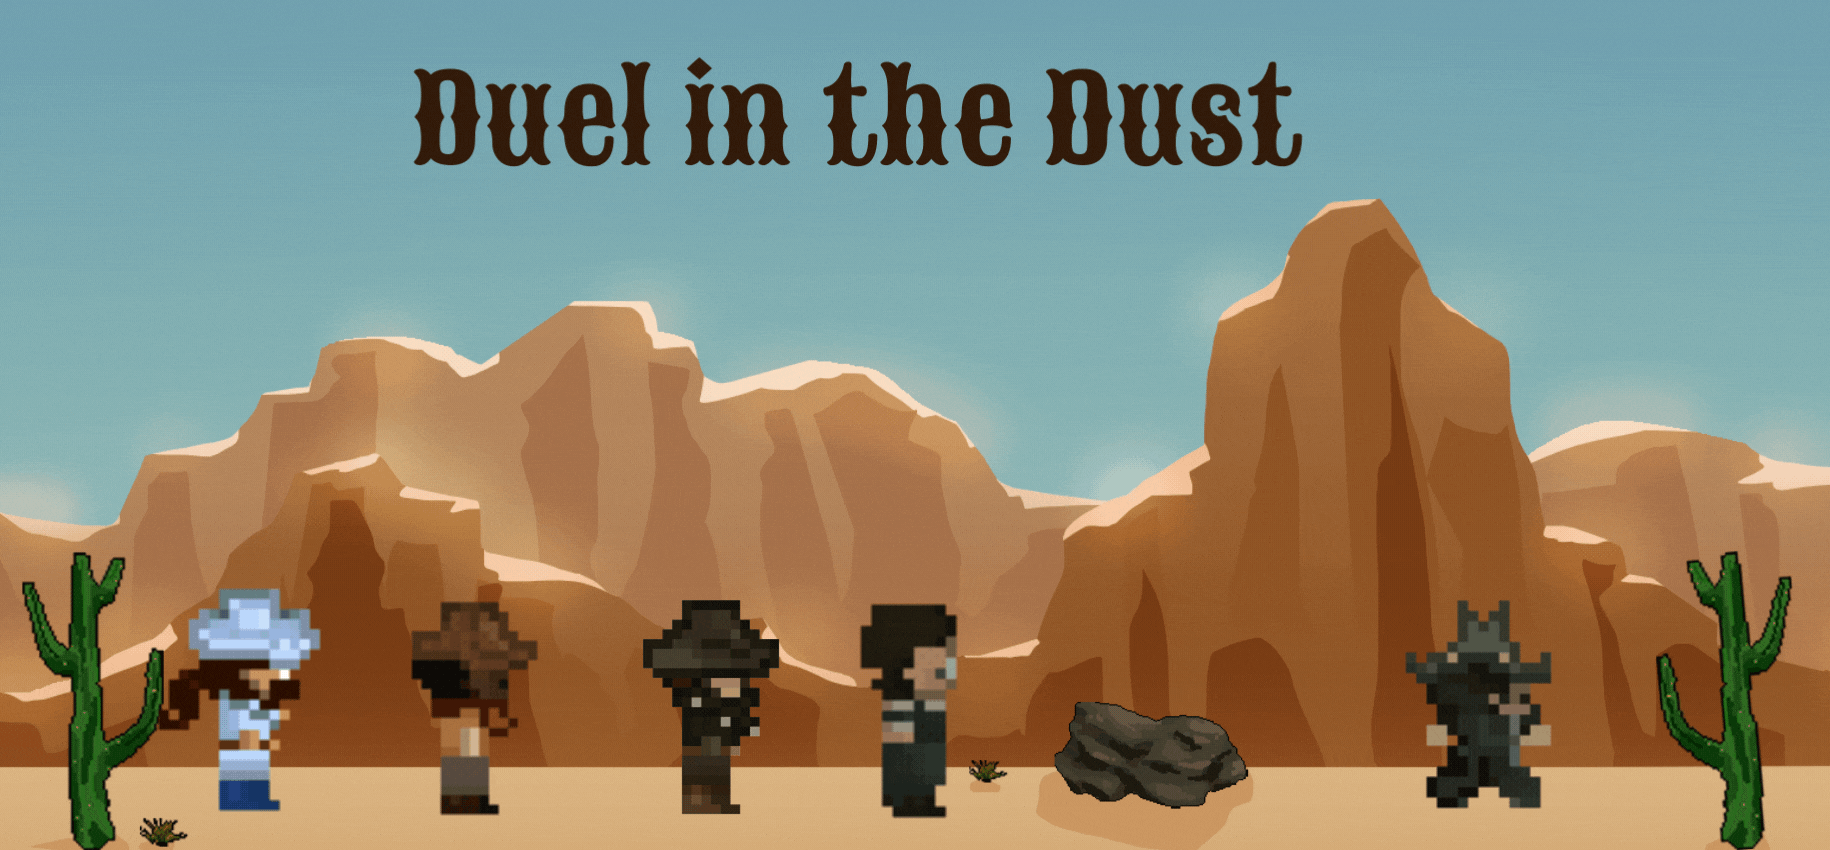 Duel In the Dust